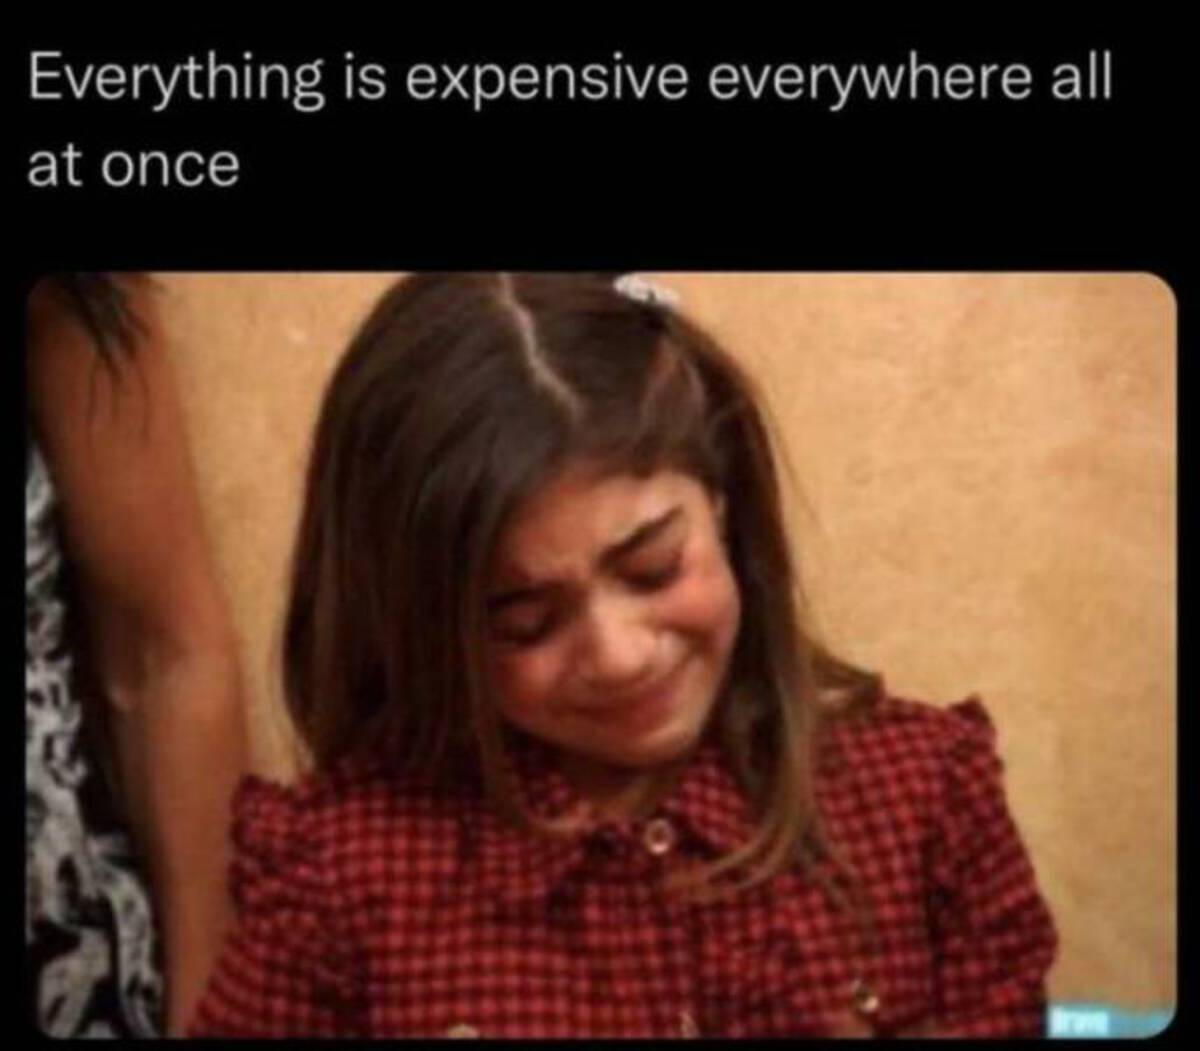 head - Everything is expensive everywhere all at once